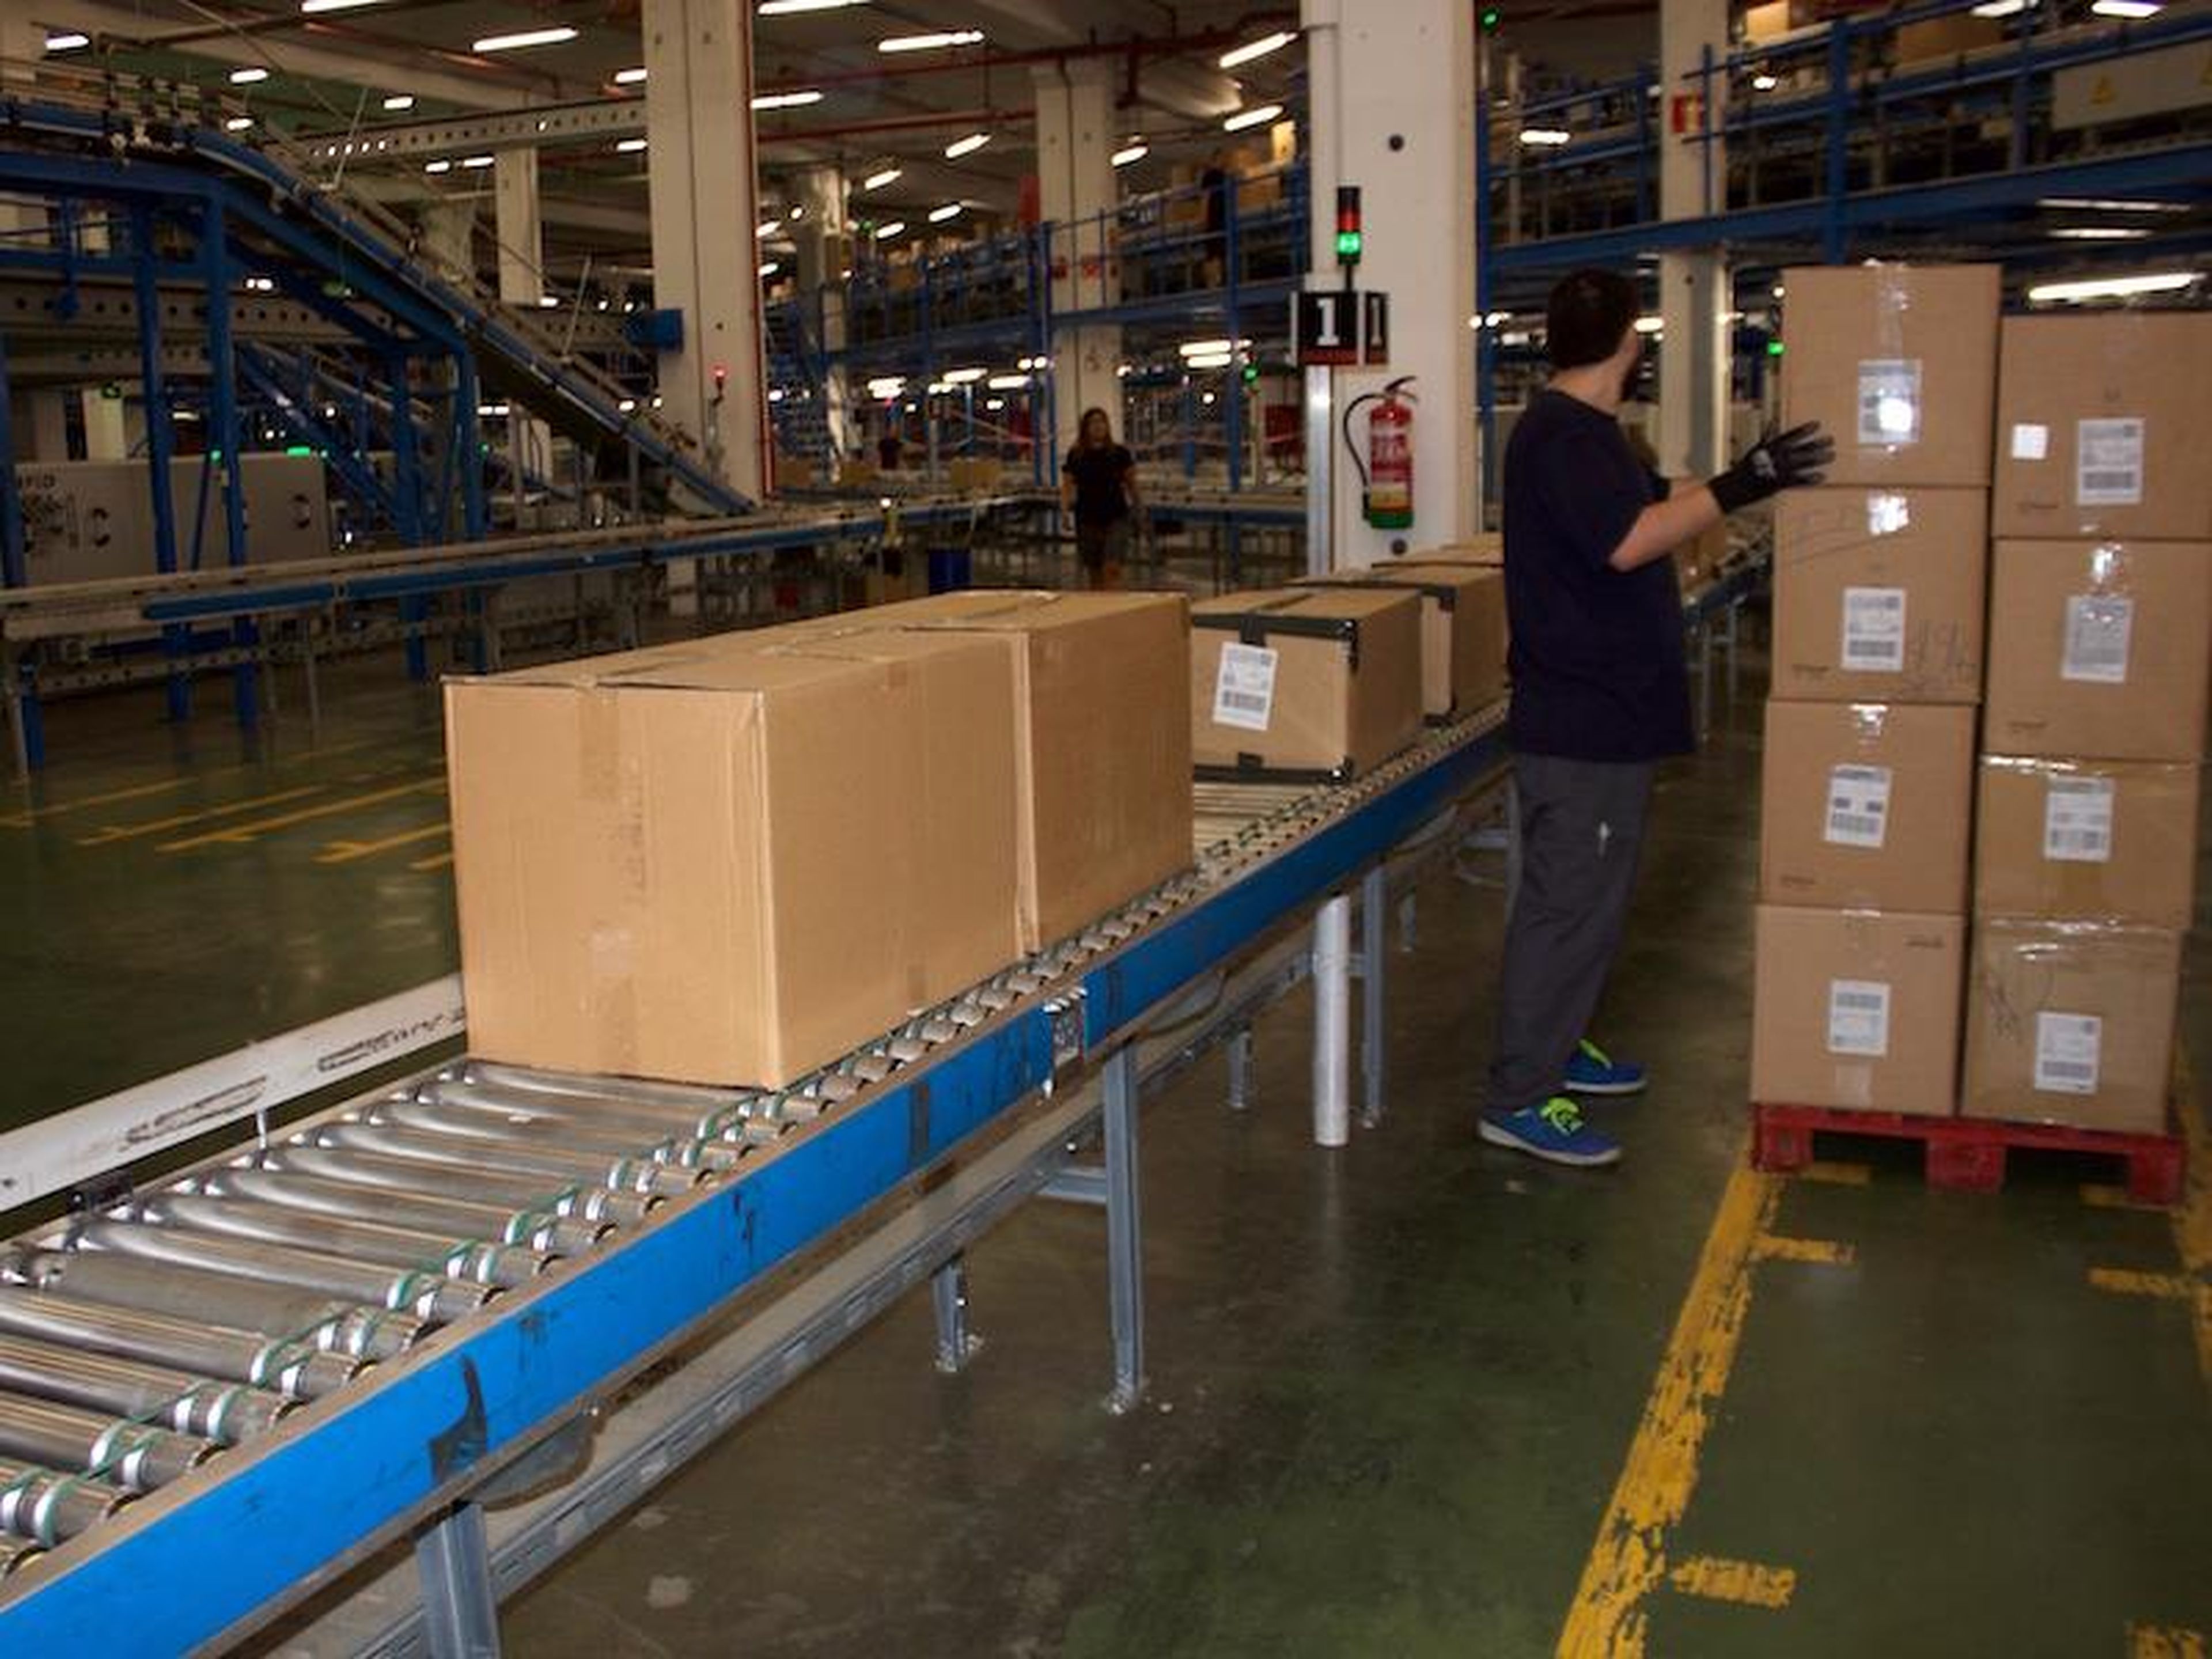 The boxes are placed on a conveyor belt and stocked in groups. These can be stored for several days in the distribution center before being shipped out.